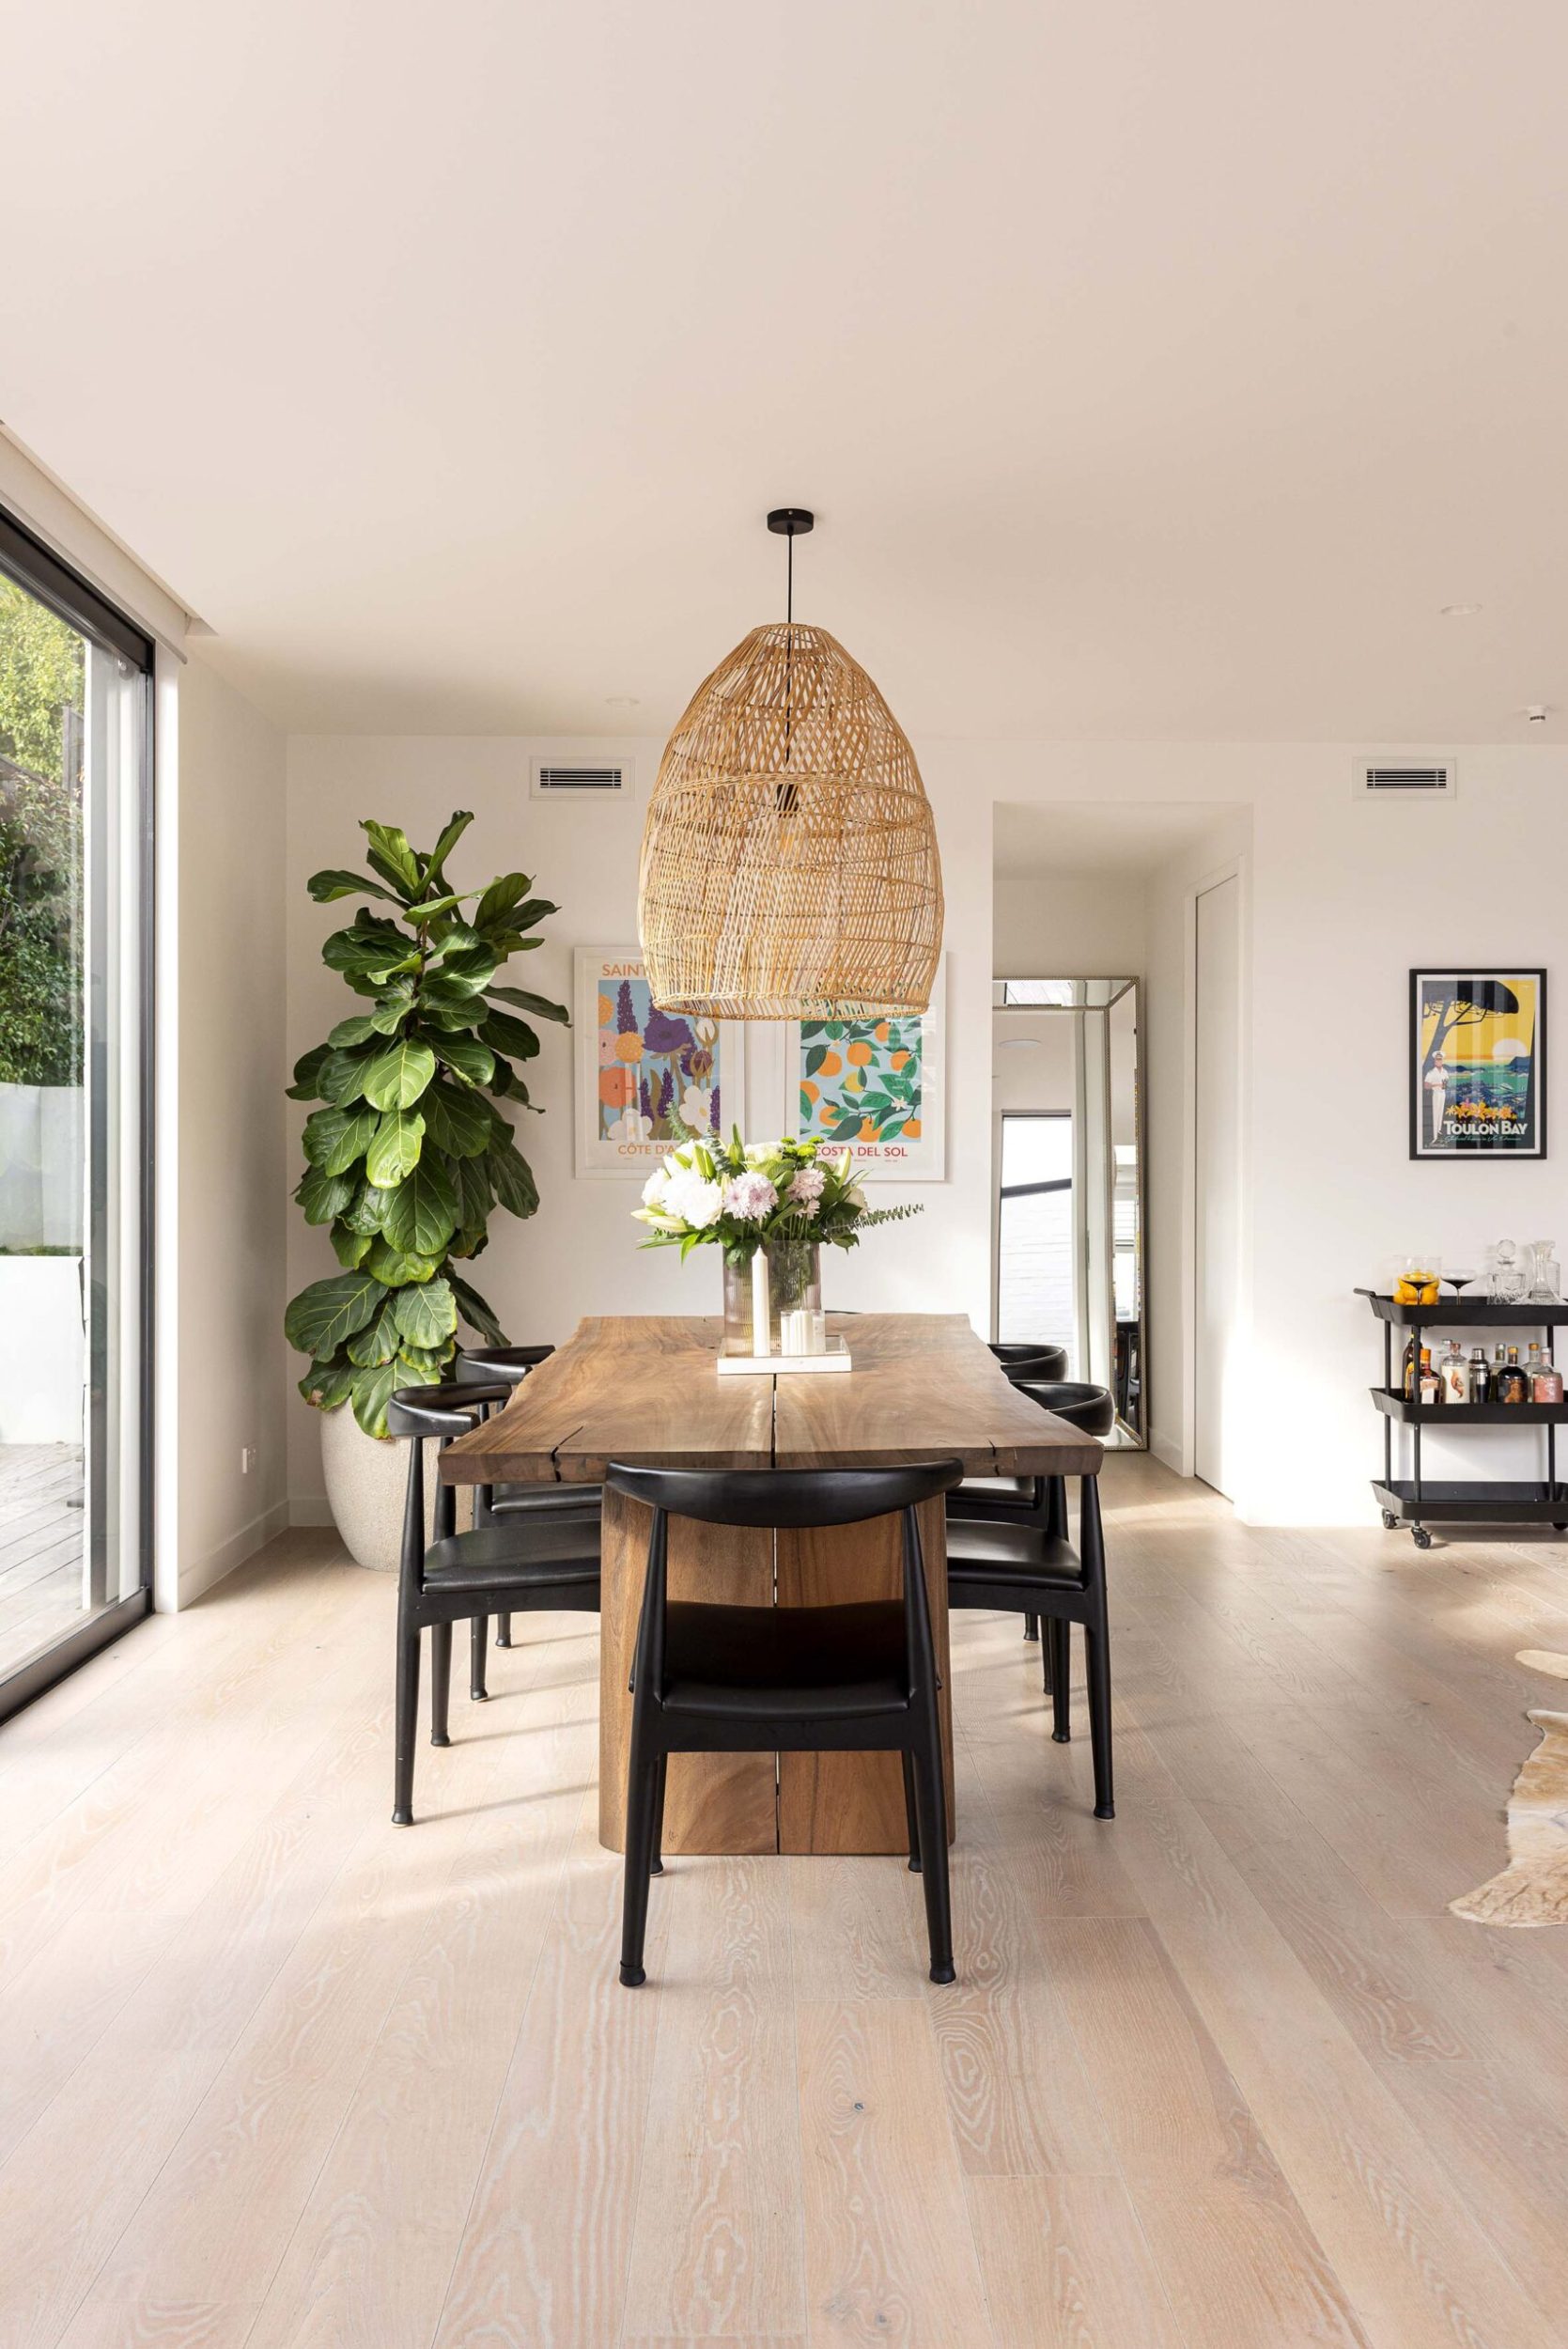 The dining room with a large wicker light shade above a deep timber table with black 